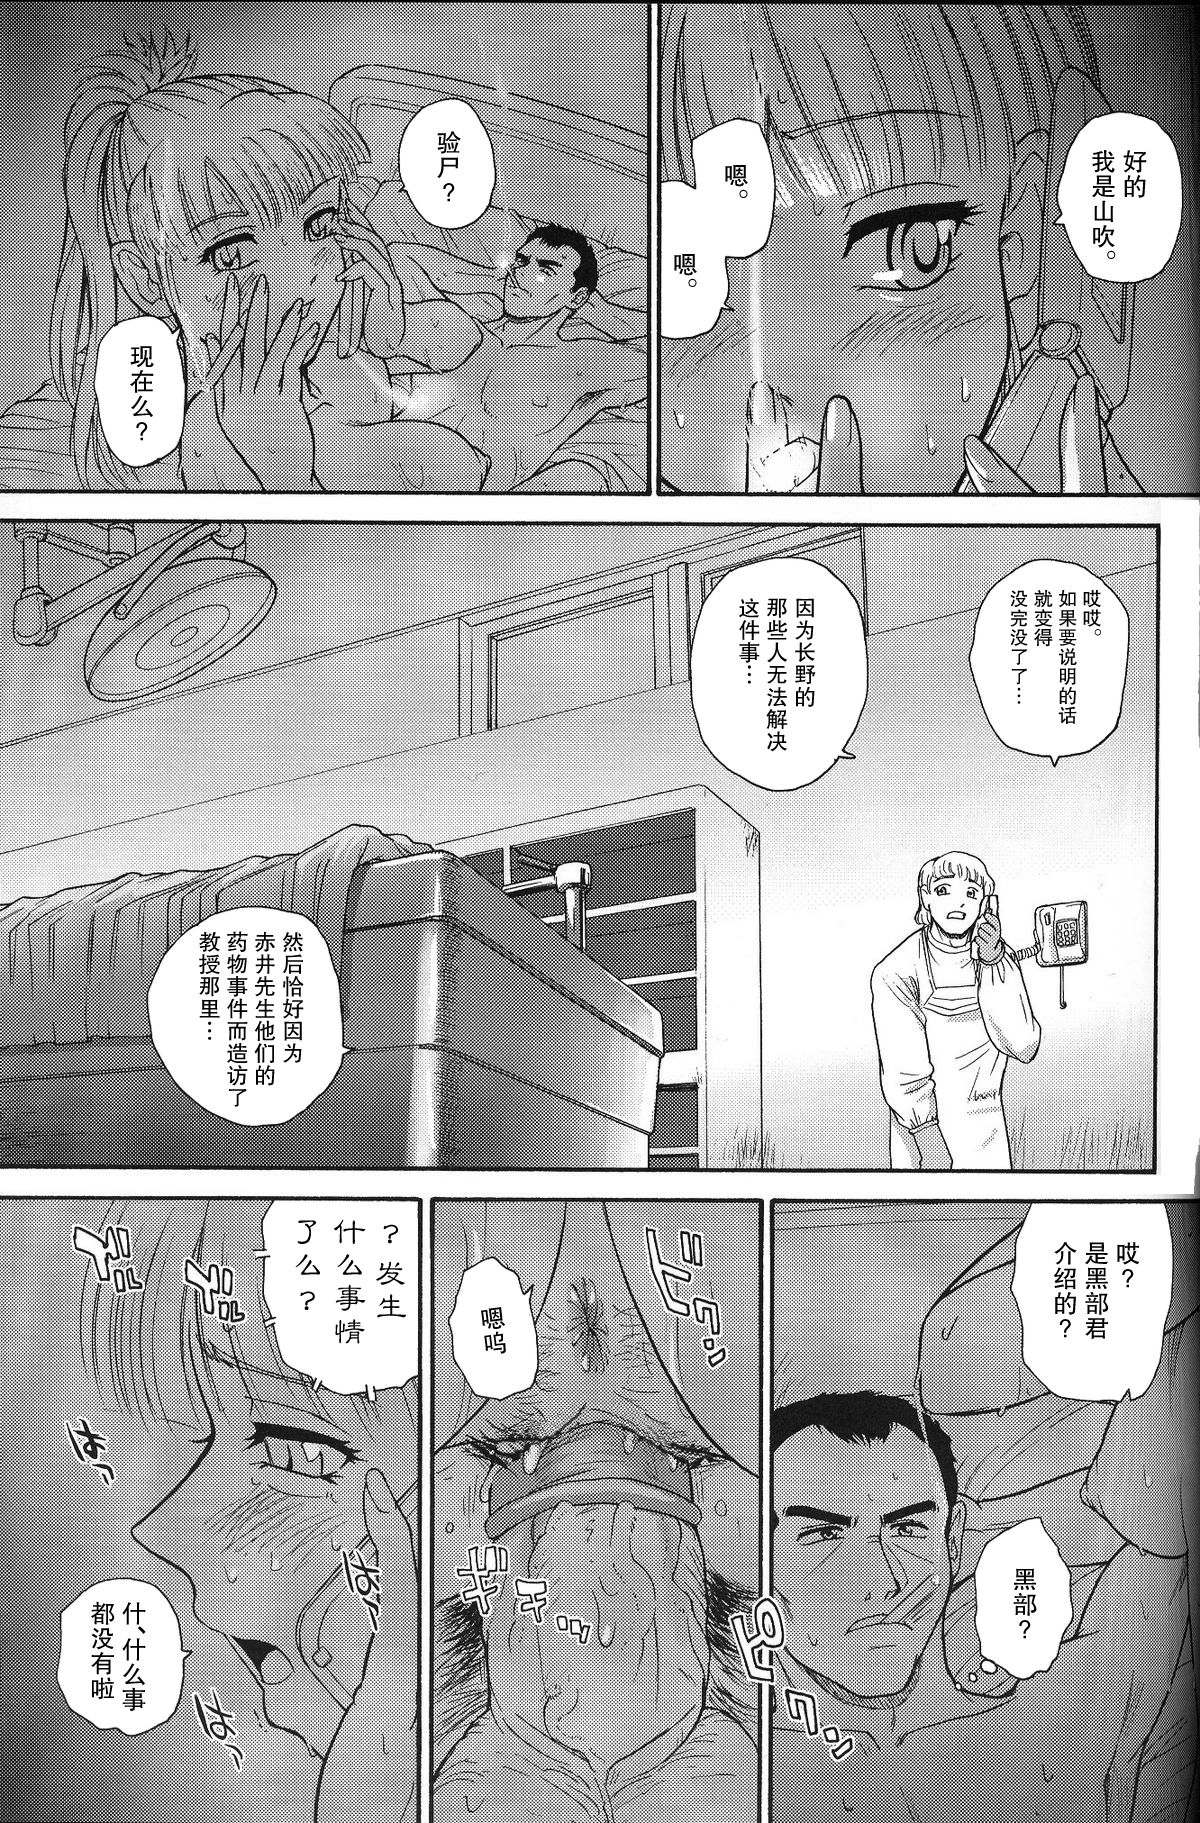 (C71) [Behind Moon (Q)] Dulce Report 8 | 达西报告 8 [Chinese] [哈尼喵汉化组] [Decensored] page 30 full